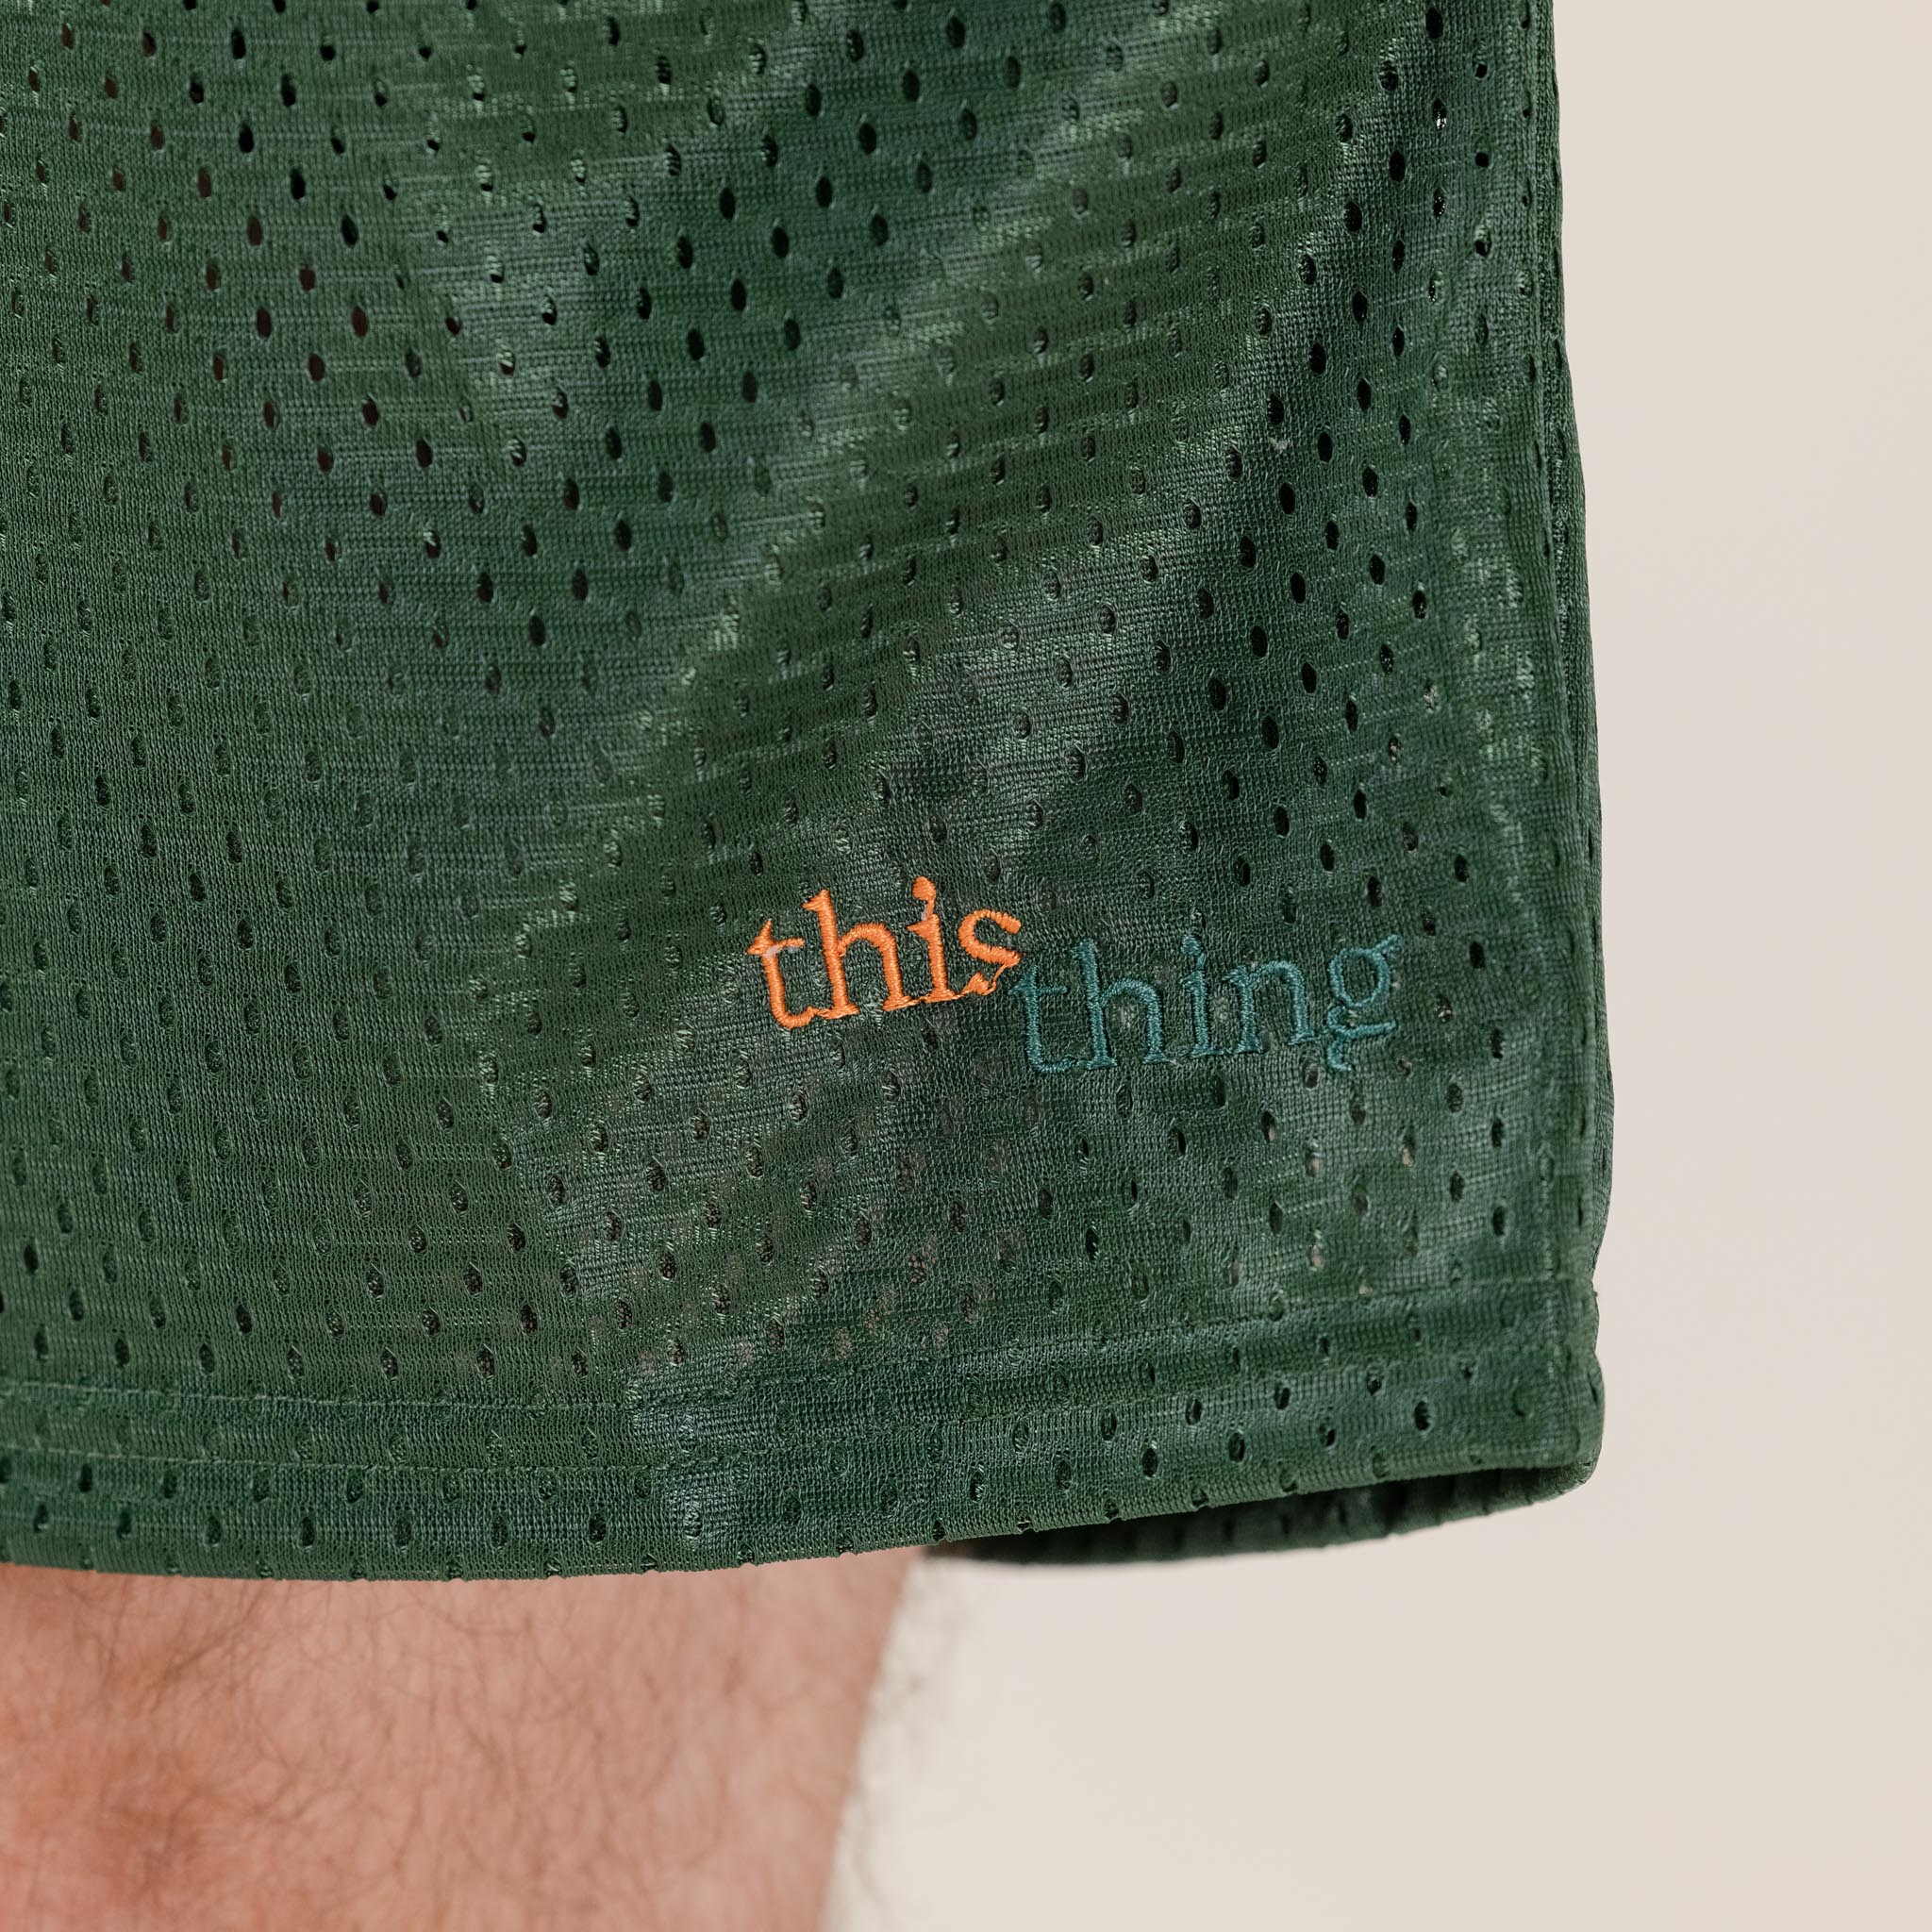 This Thing - Made in USA Mesh Shorts - Forest Green Basketball Mesh Shorts